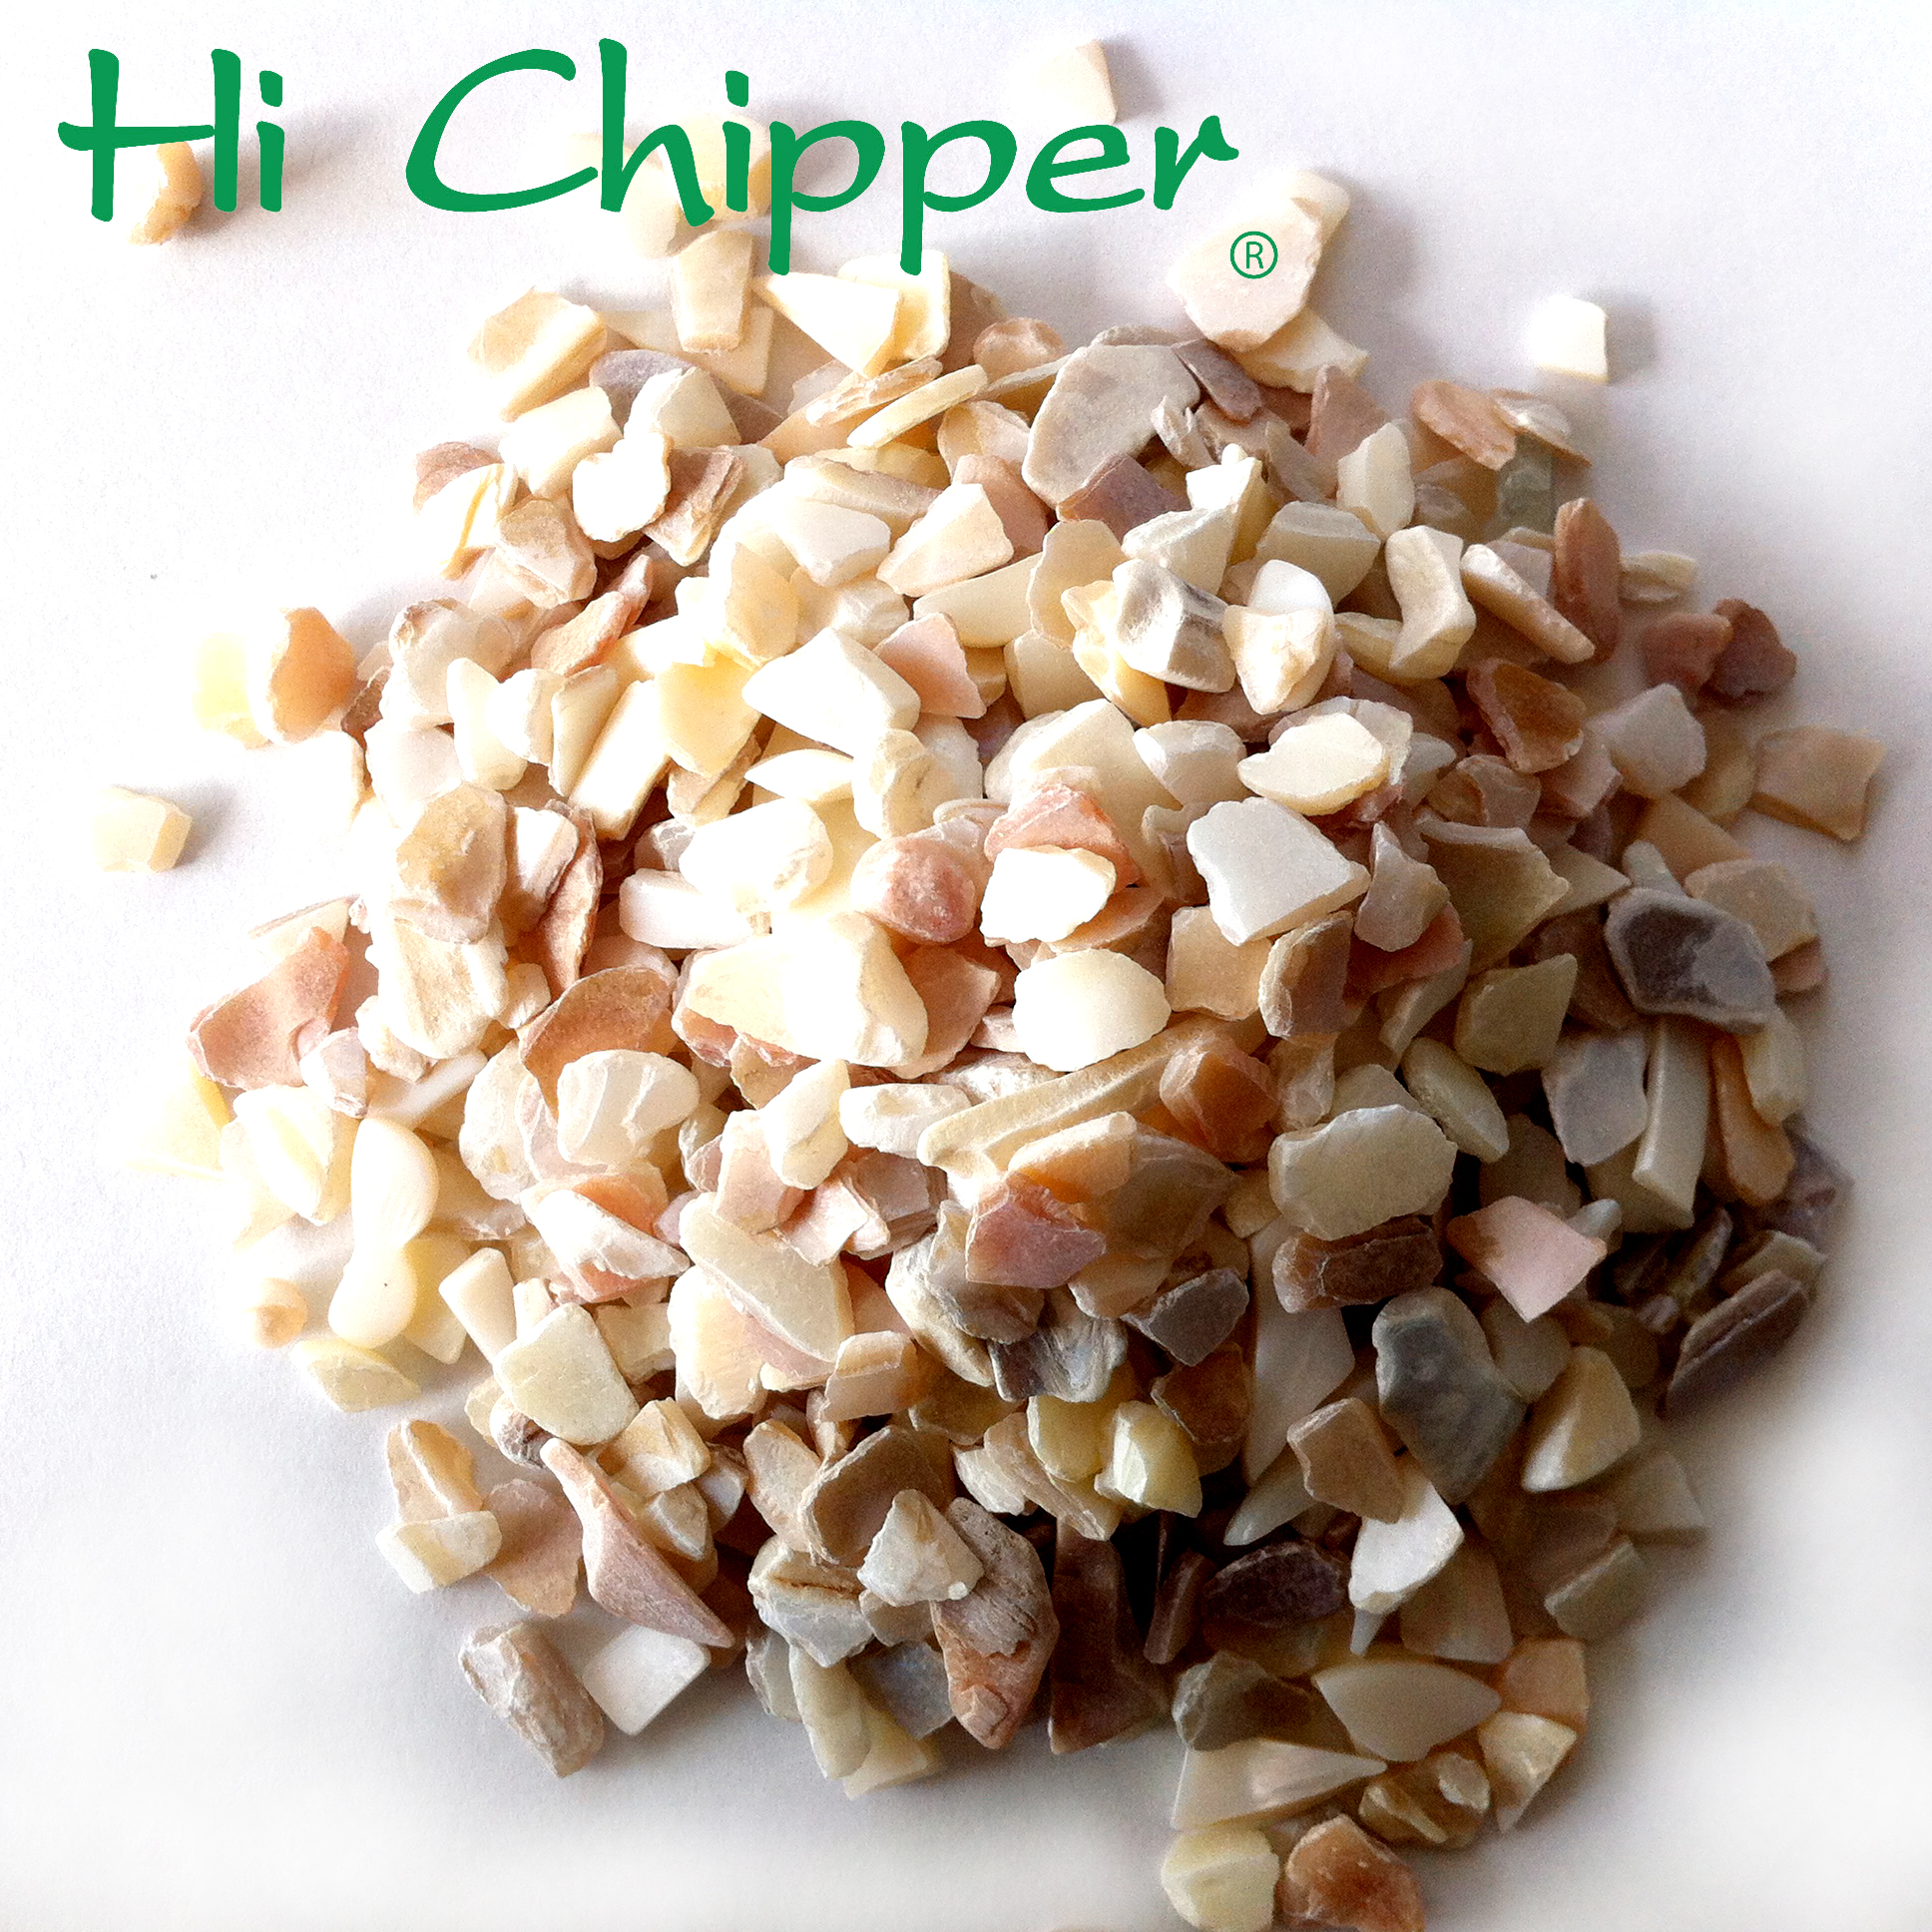 Wholesale Crushed Crushed Mother of Pearl Used for Terrazzo And Home Decoration